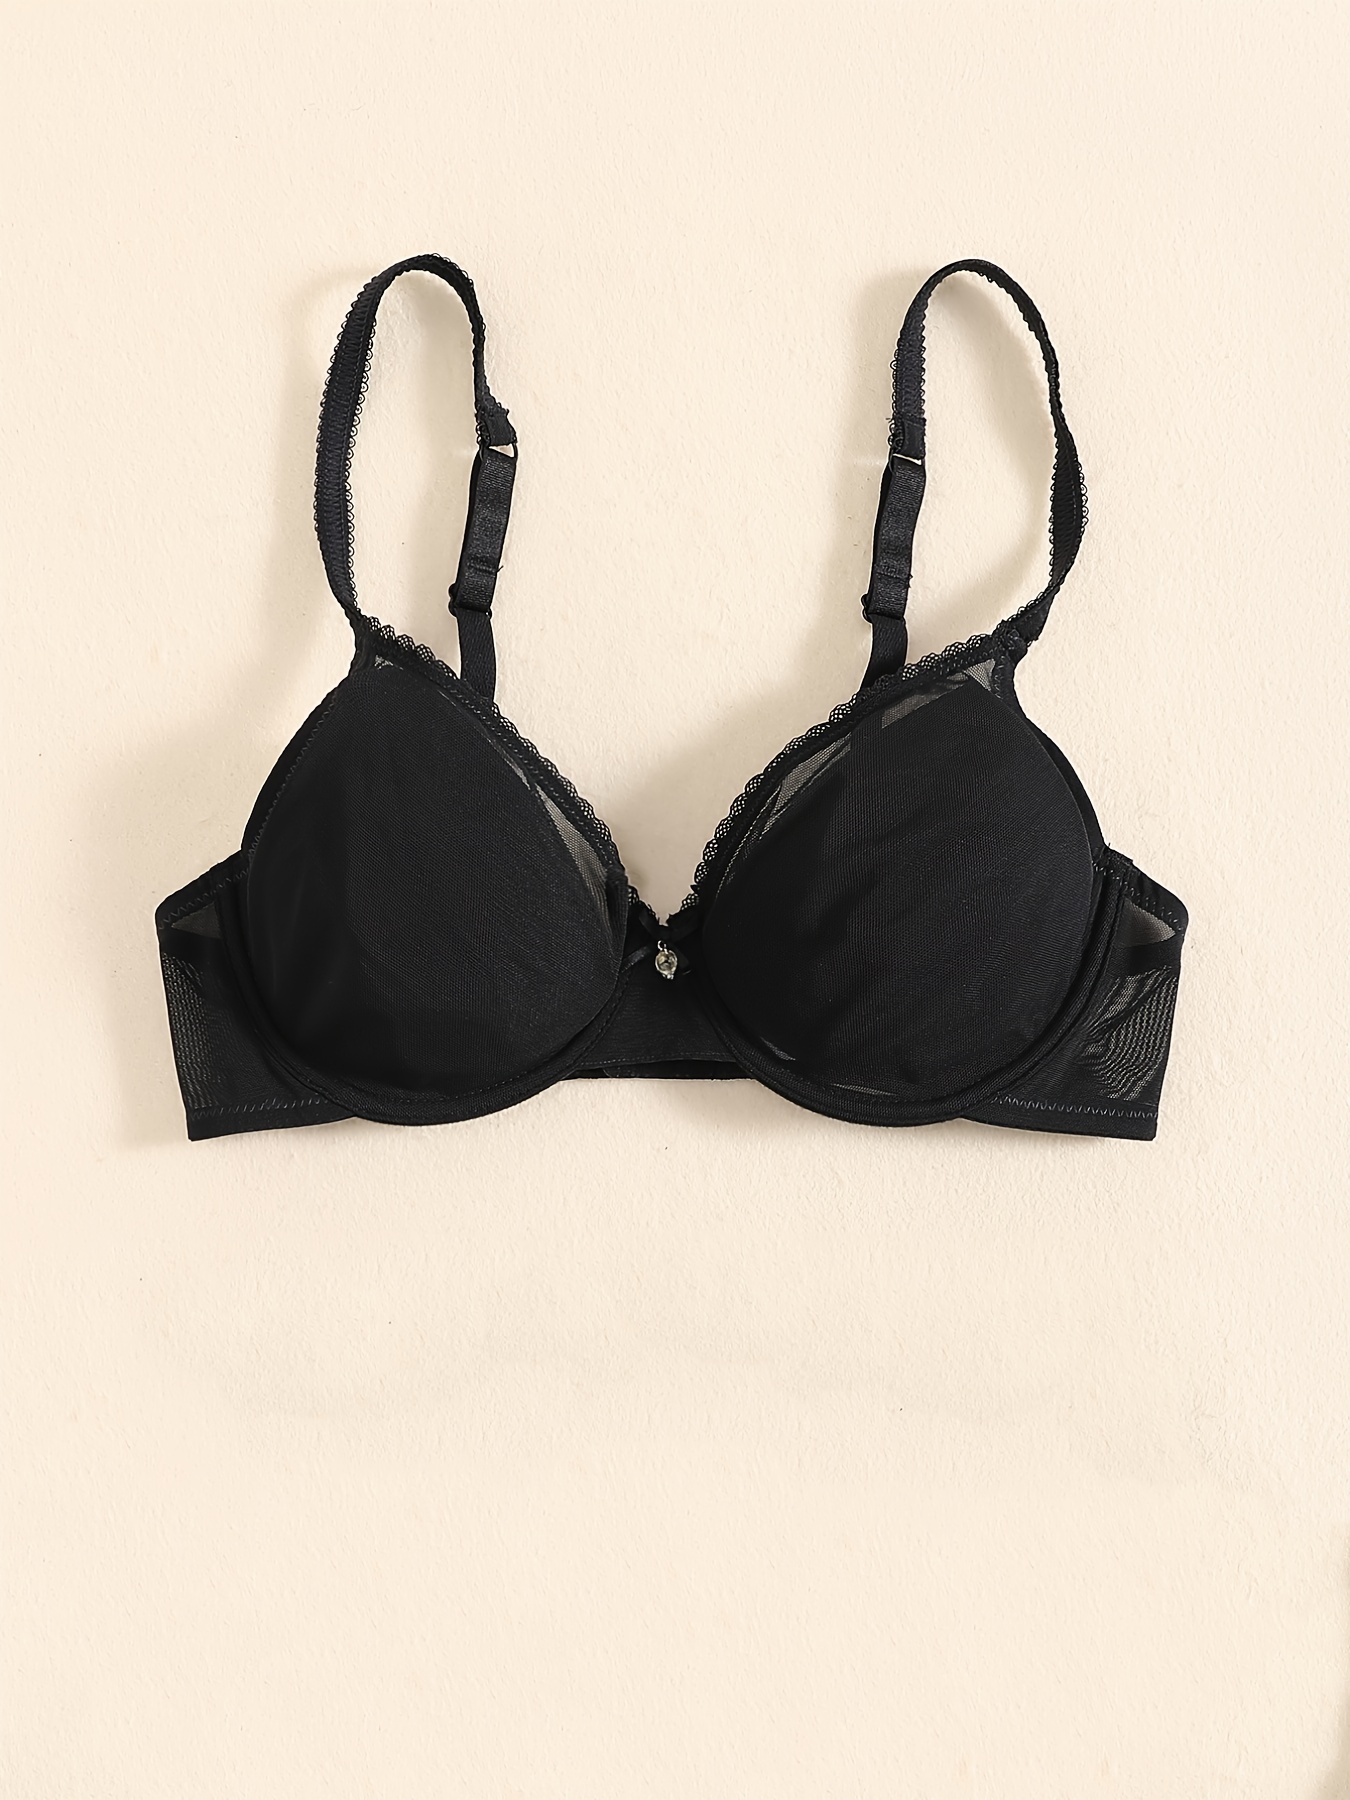 EHQJNJ Black Bralette for under Sheer Shirt with Support Womens Underwear  Front Buckle Embroidered Underwear Gathered Thin Cotton Cup Bra Without